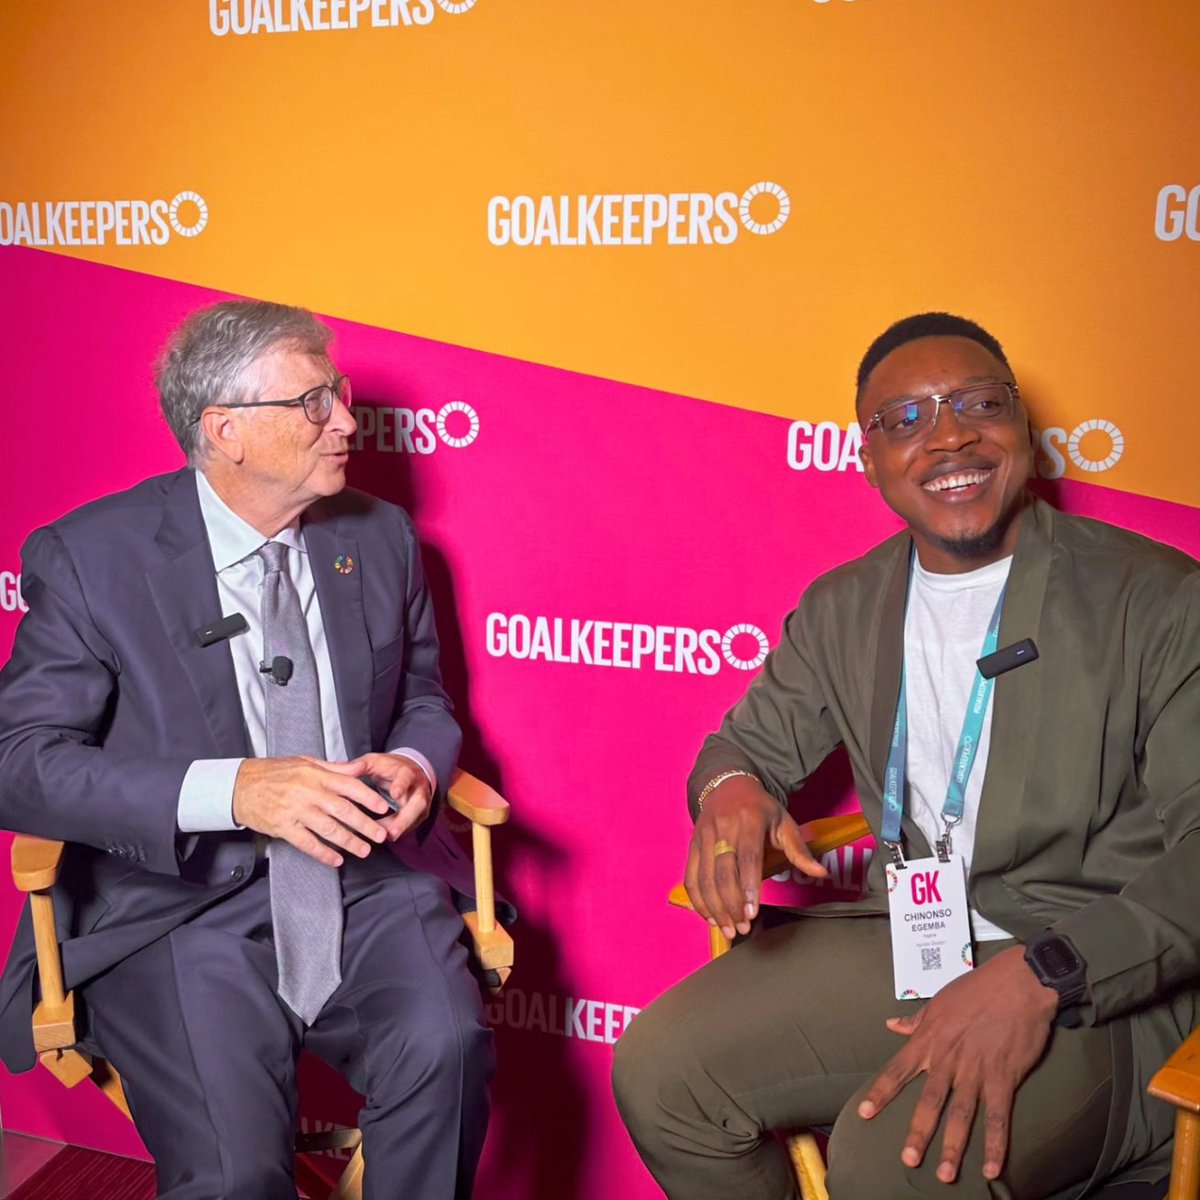 Na so I corner Bill Gates, the co-founder of the Bill and Melinda Gates Foundation, to ask some very questions during the #Goalkeepers2030 conference as a #GoalkeepersPartner 

We can save 2 million lives by 2030. We can play our part. Turn on my notifs so you don't miss it.